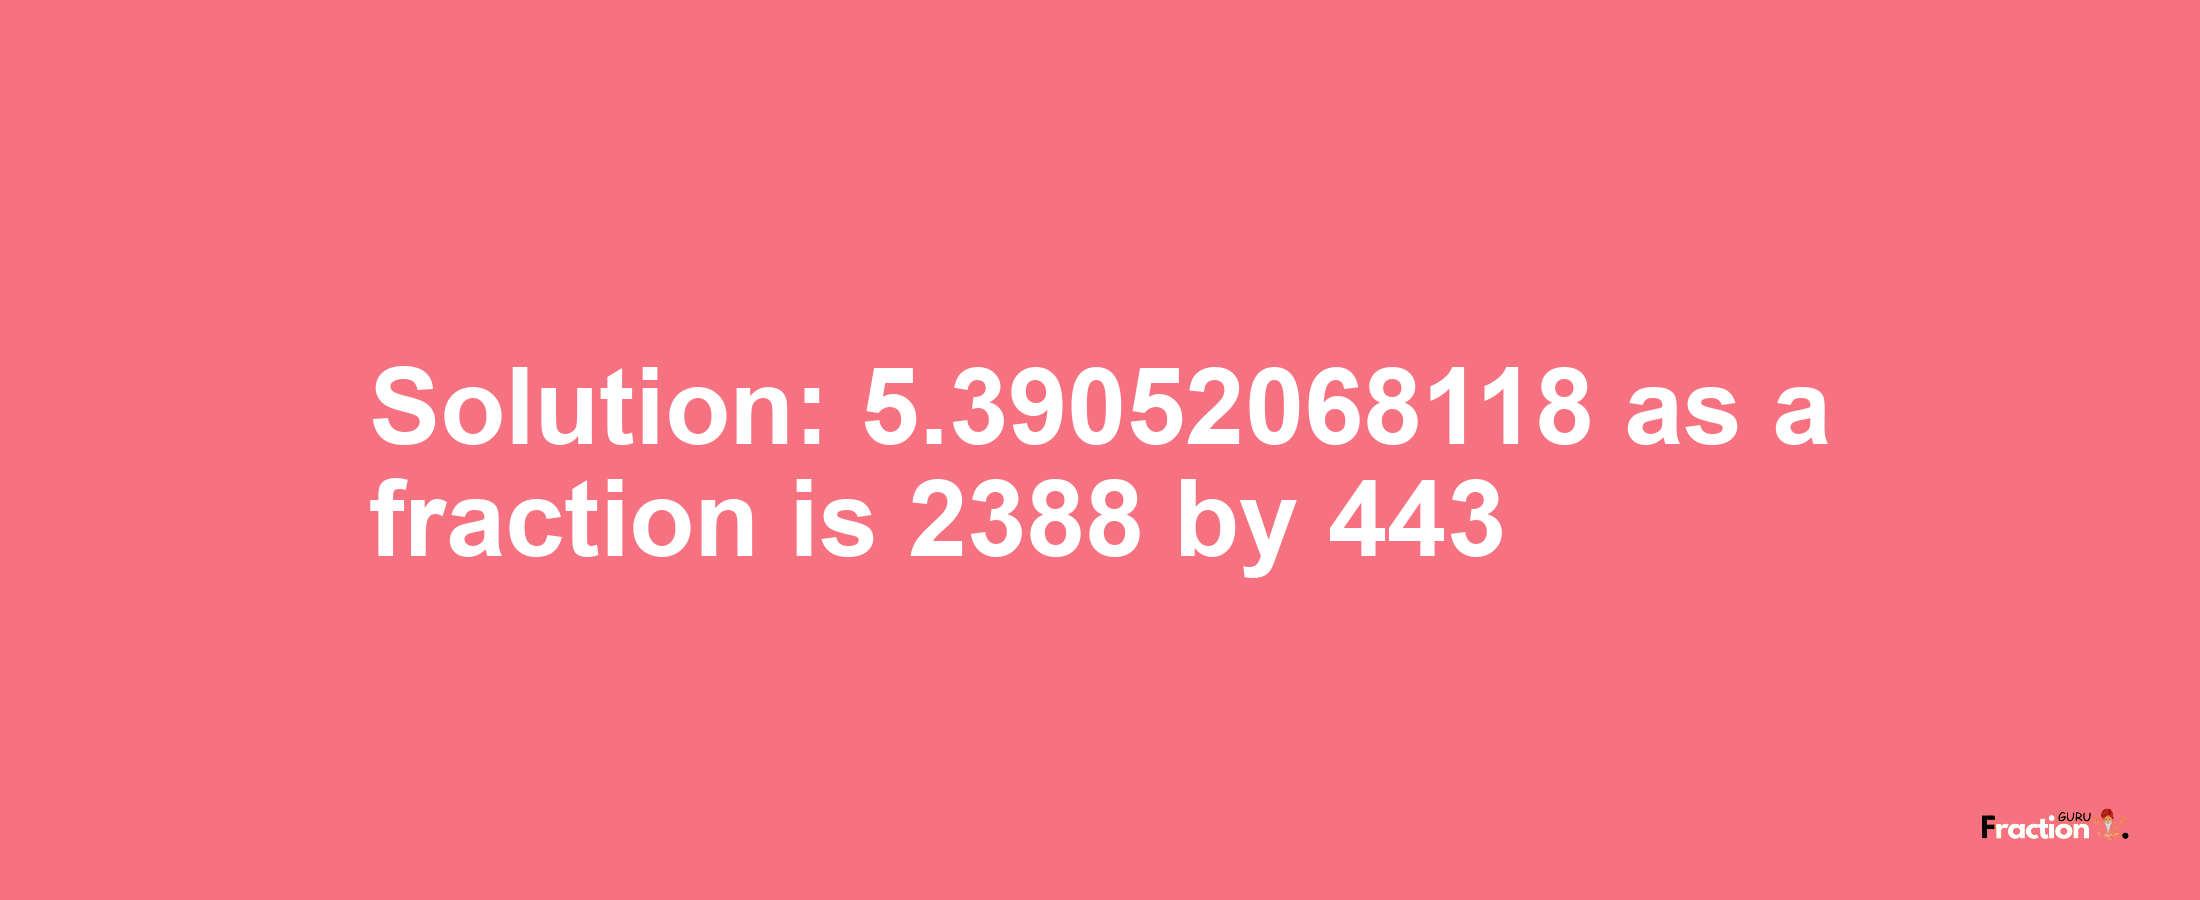 Solution:5.39052068118 as a fraction is 2388/443